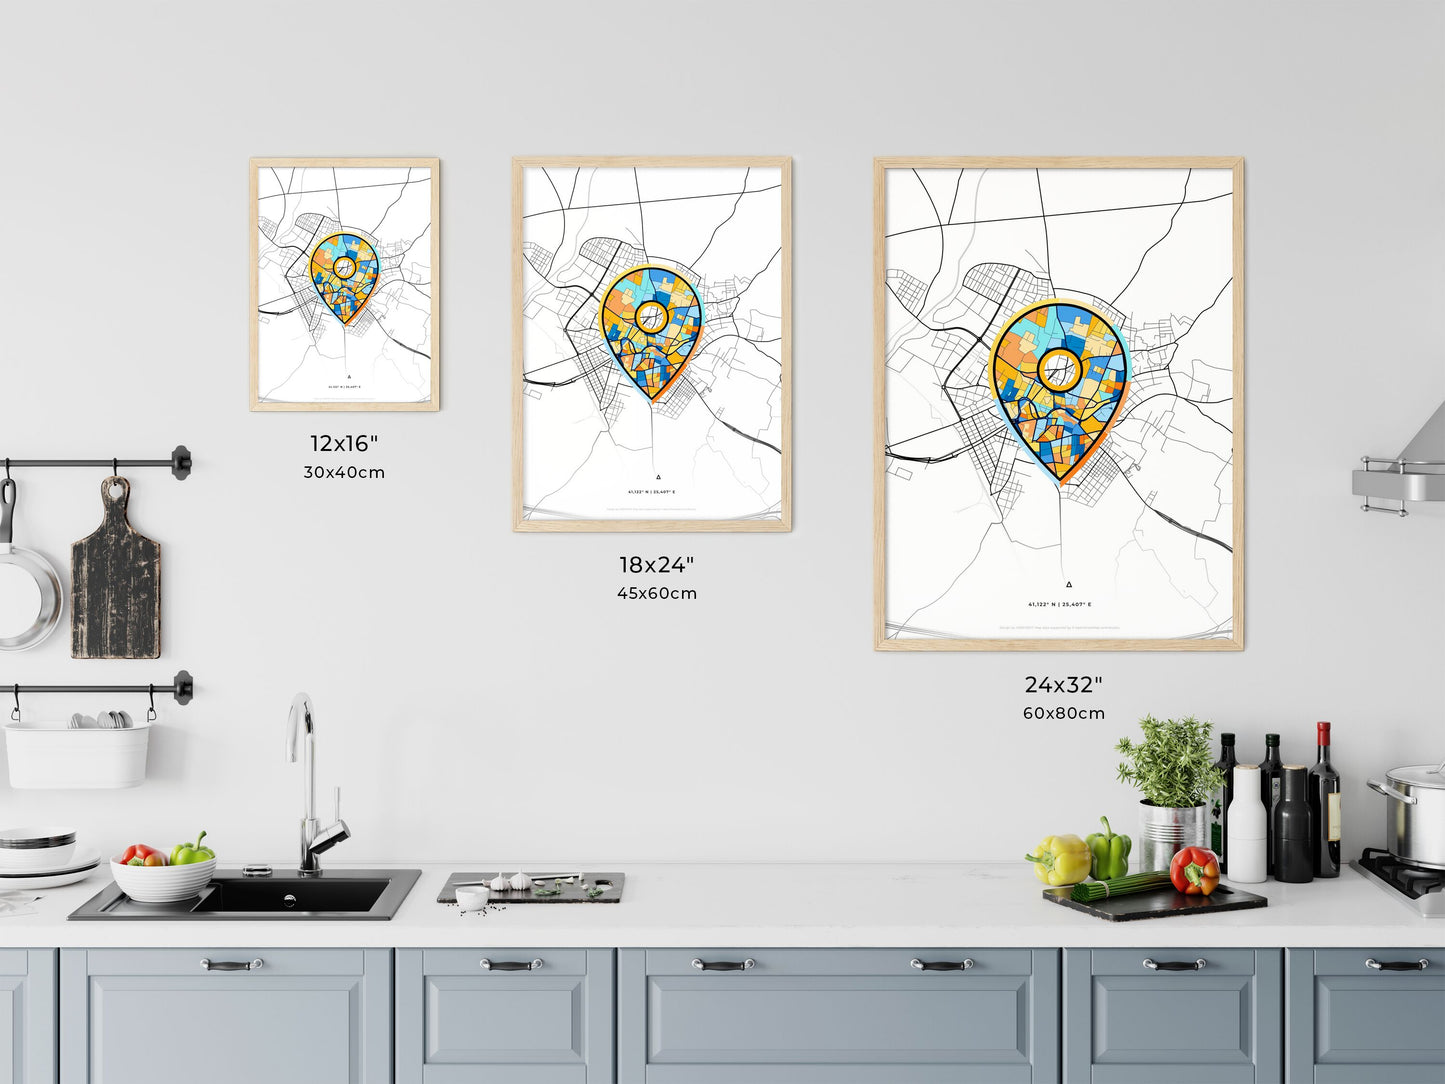 KOMOTINI GREECE minimal art map with a colorful icon. Where it all began, Couple map gift.